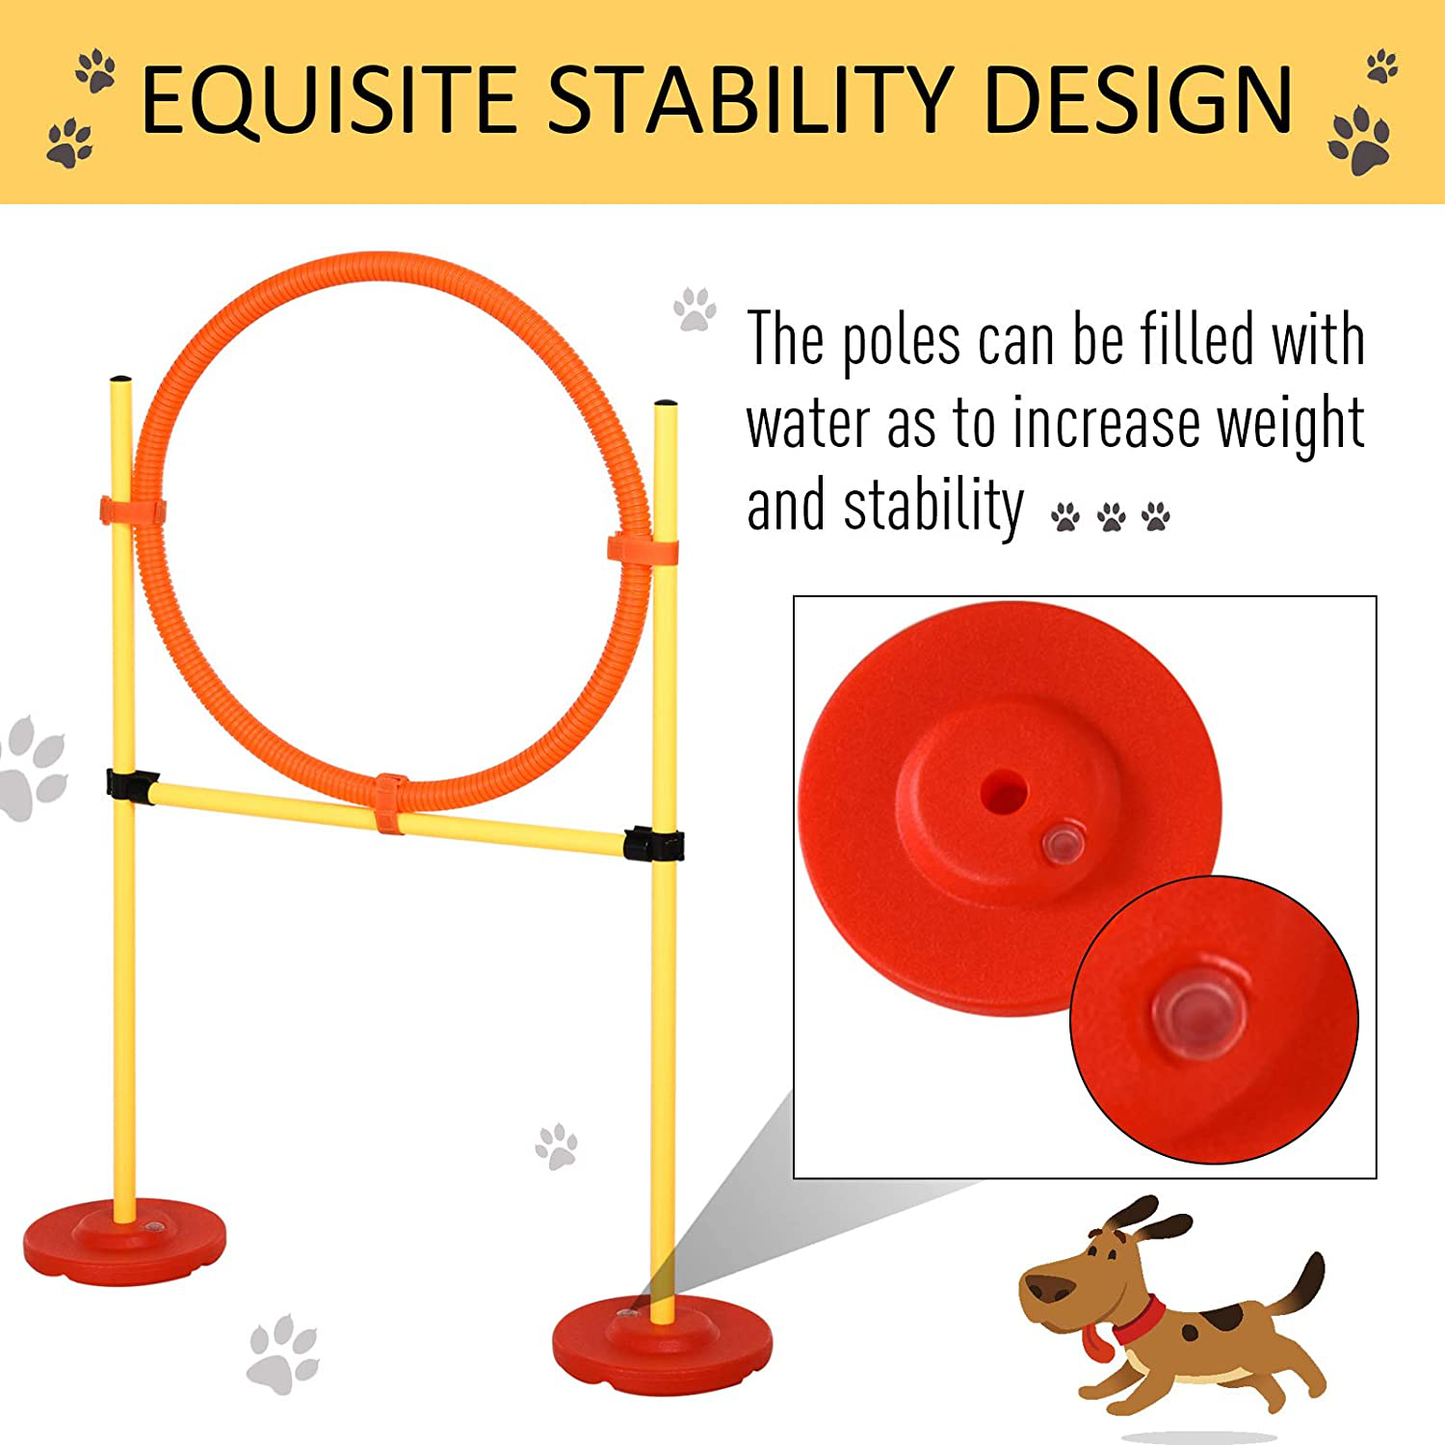 Pawhut 4-Piece Portable Pet Agility Training Obstacle Set for Dogs with Weave Pole, Jumping Ring, High Jump, & Tunnel Animals & Pet Supplies > Pet Supplies > Dog Supplies > Dog Treadmills PawHut   